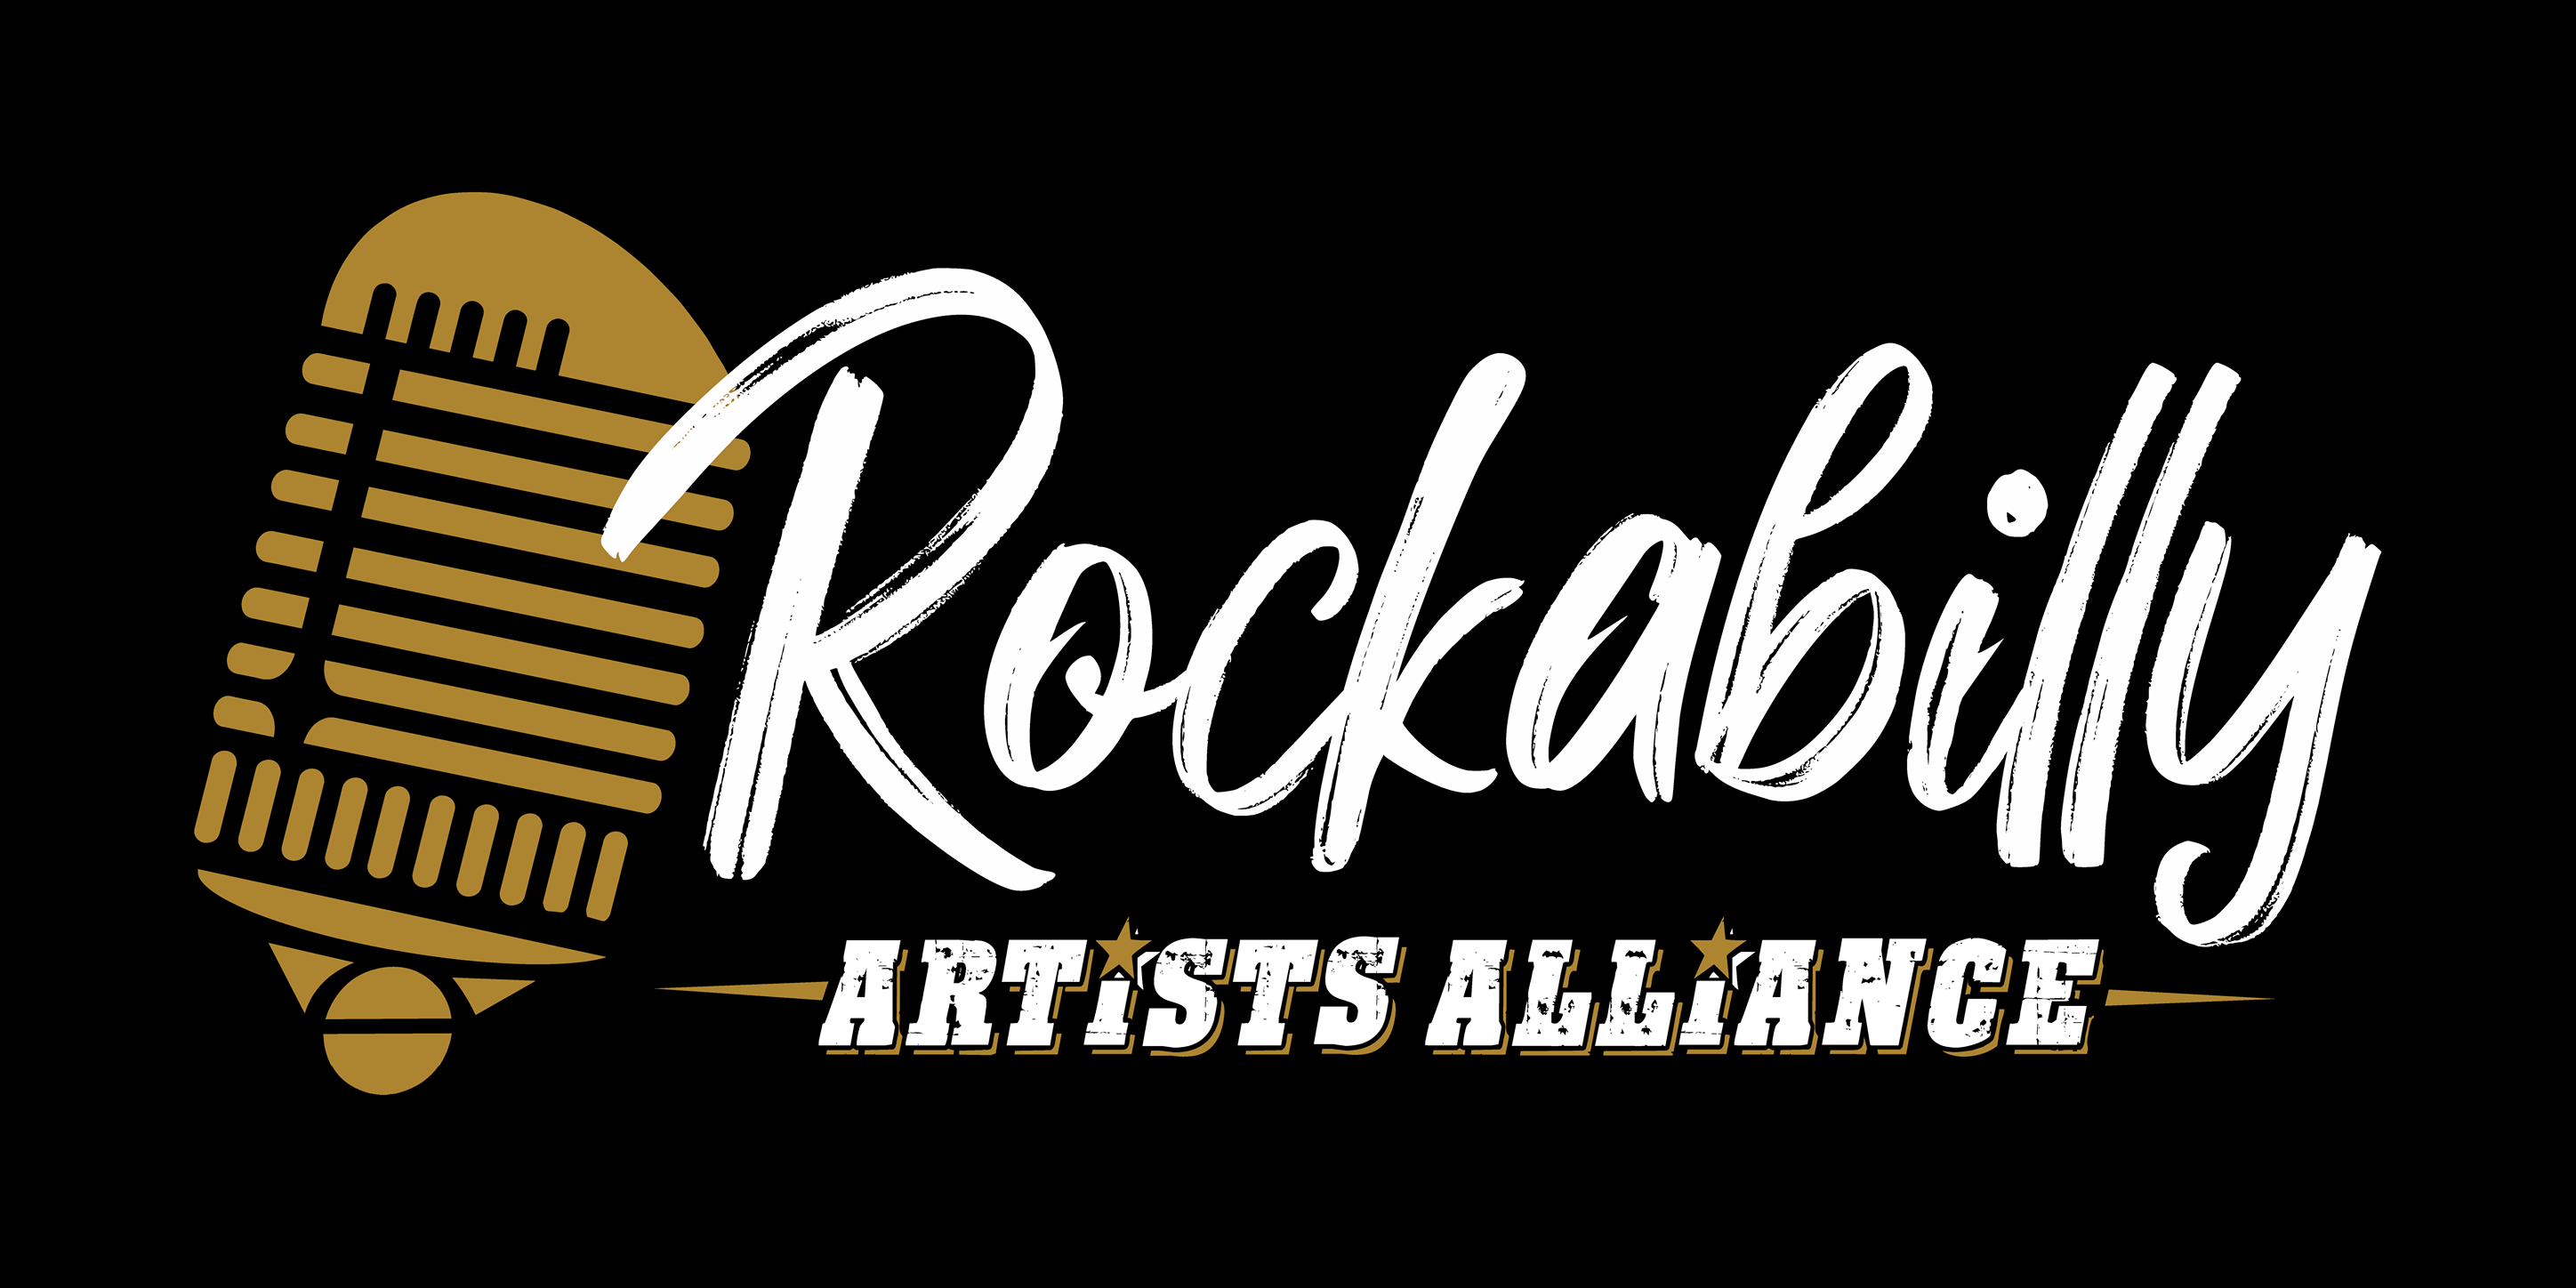 Telferu2019s unveiling was made possible in partnership with the Rockabilly Artist Alliance